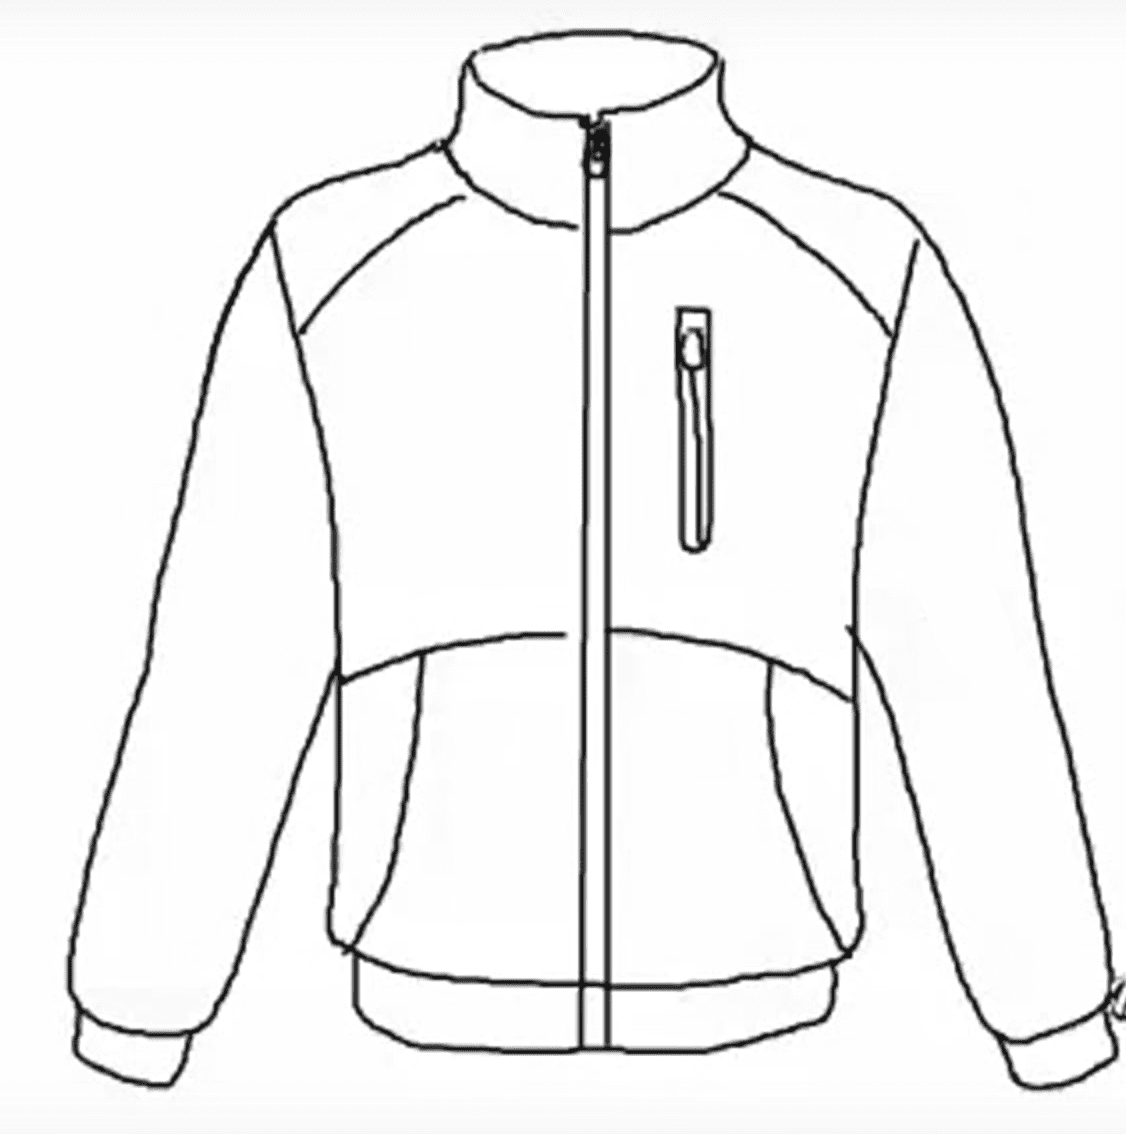 Coloring pages Clothes. Download or print online for kids